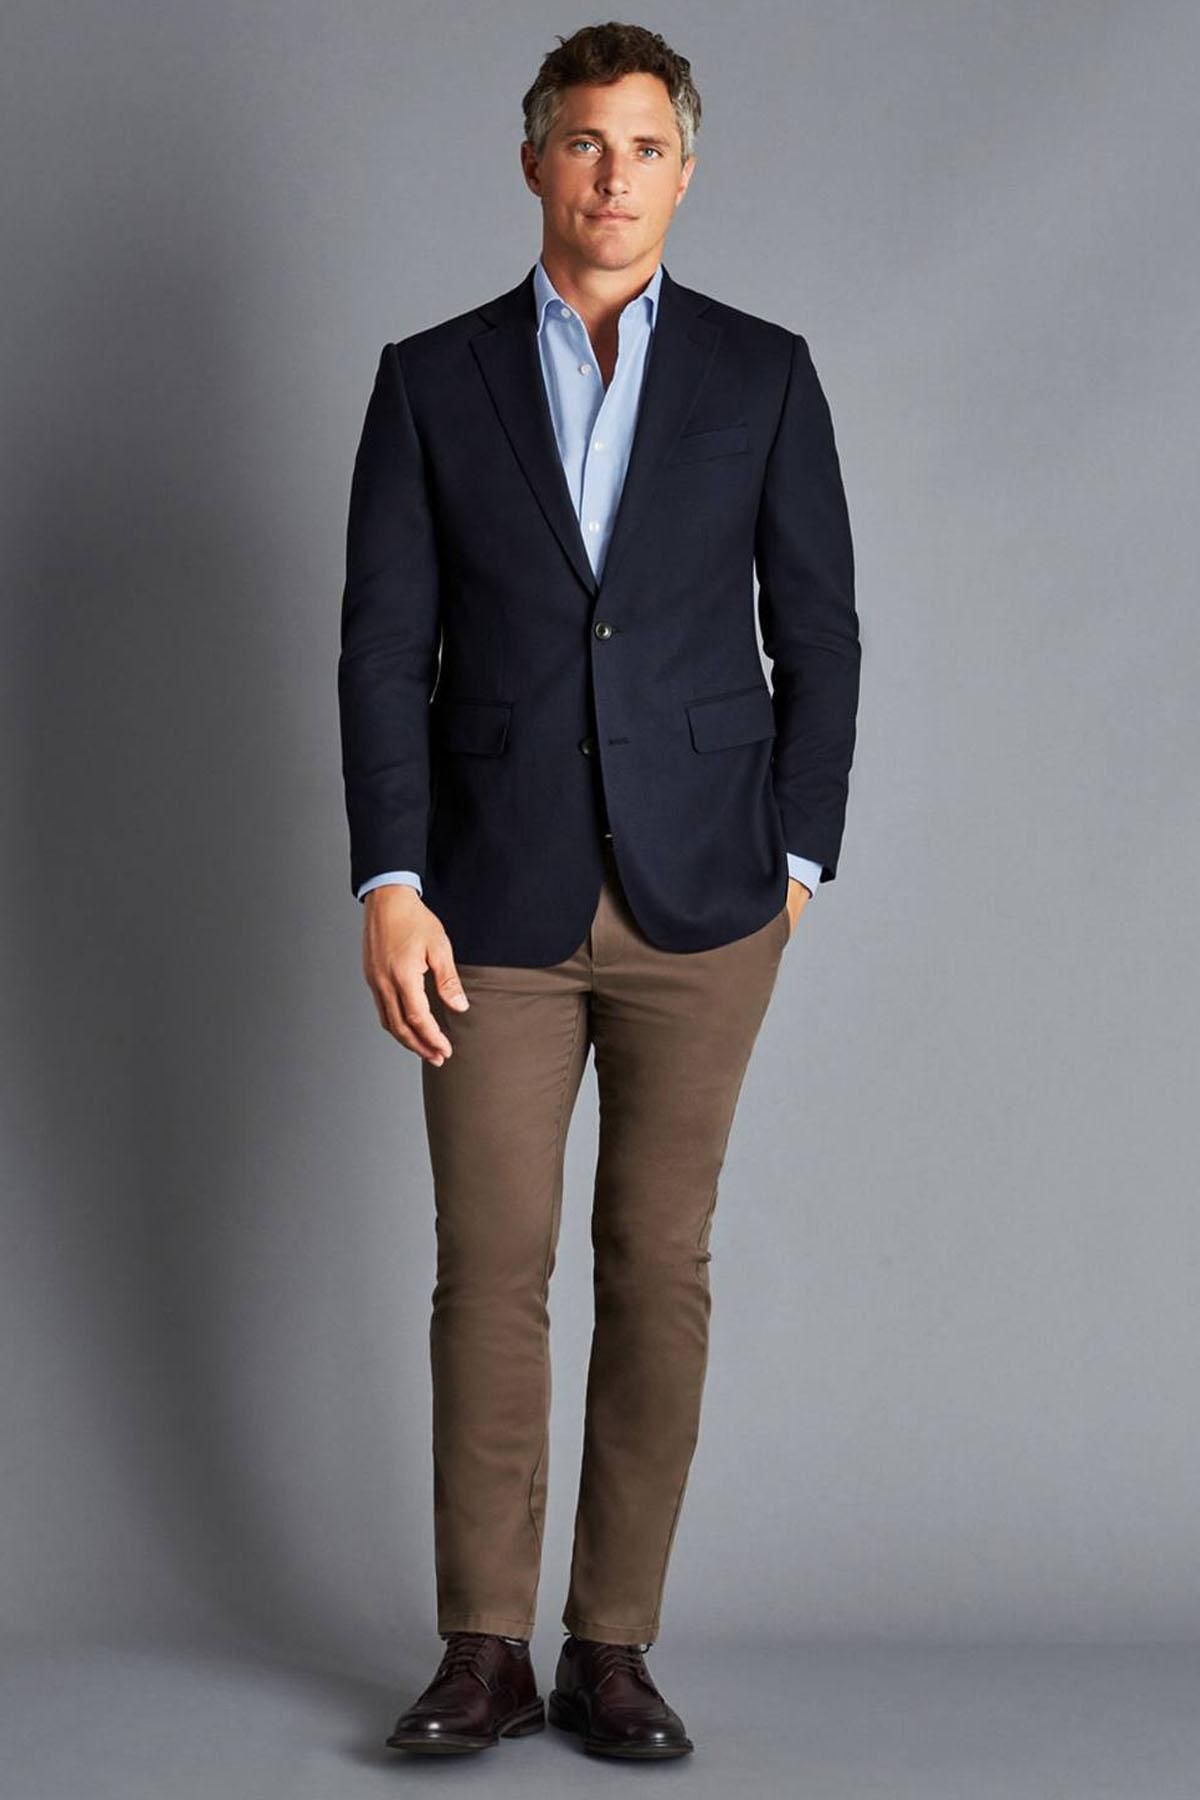 Khaki Dress Pants with Light Blue Blazer Outfits For Men (24 ideas &  outfits) | Lookastic